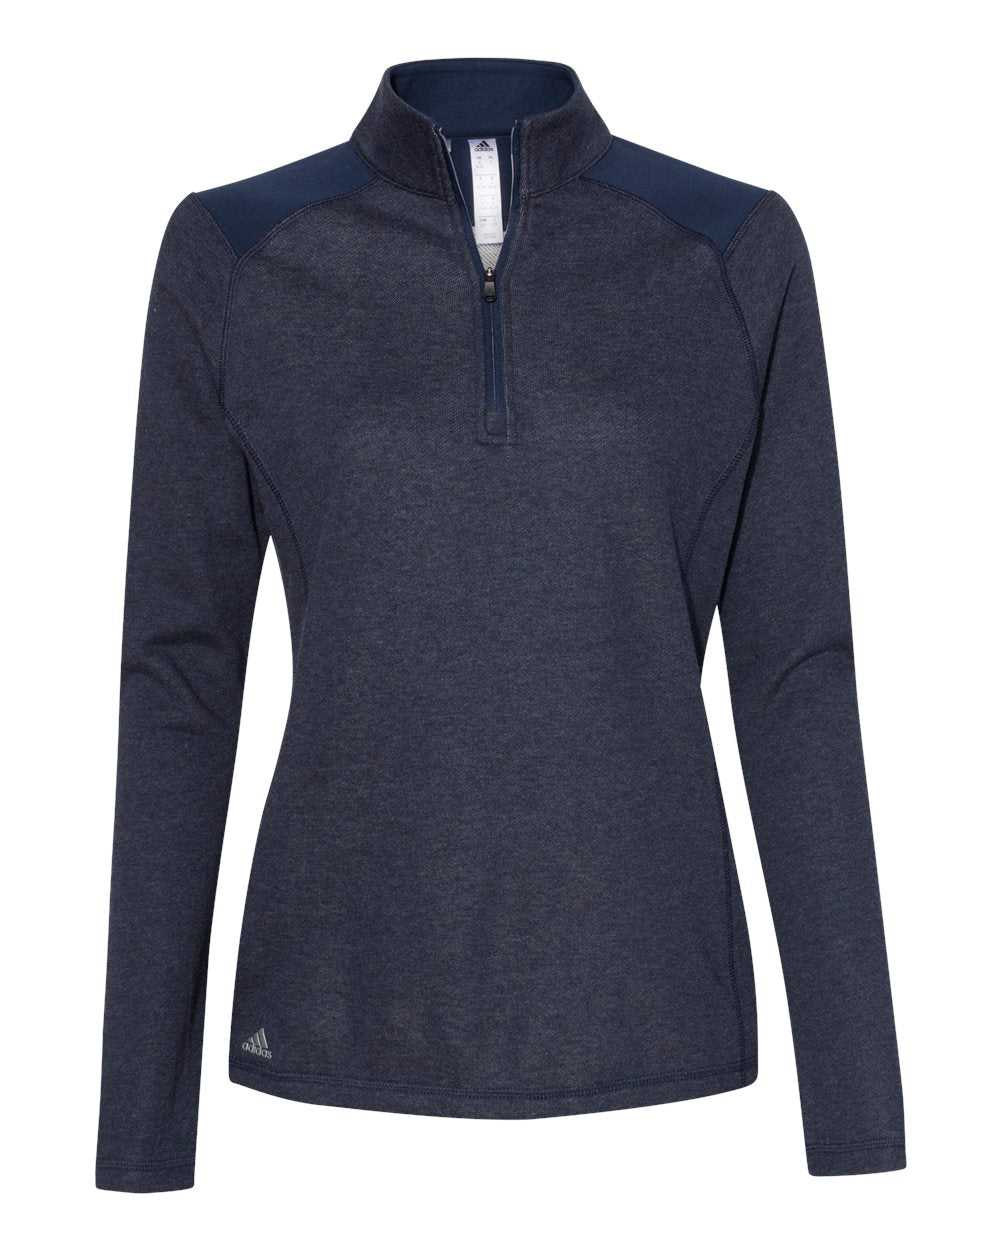 Adidas A464 Women's Heathered Quarter Zip Pullover with Colorblocked Shoulders - Collegiate Navy Heather - HIT a Double